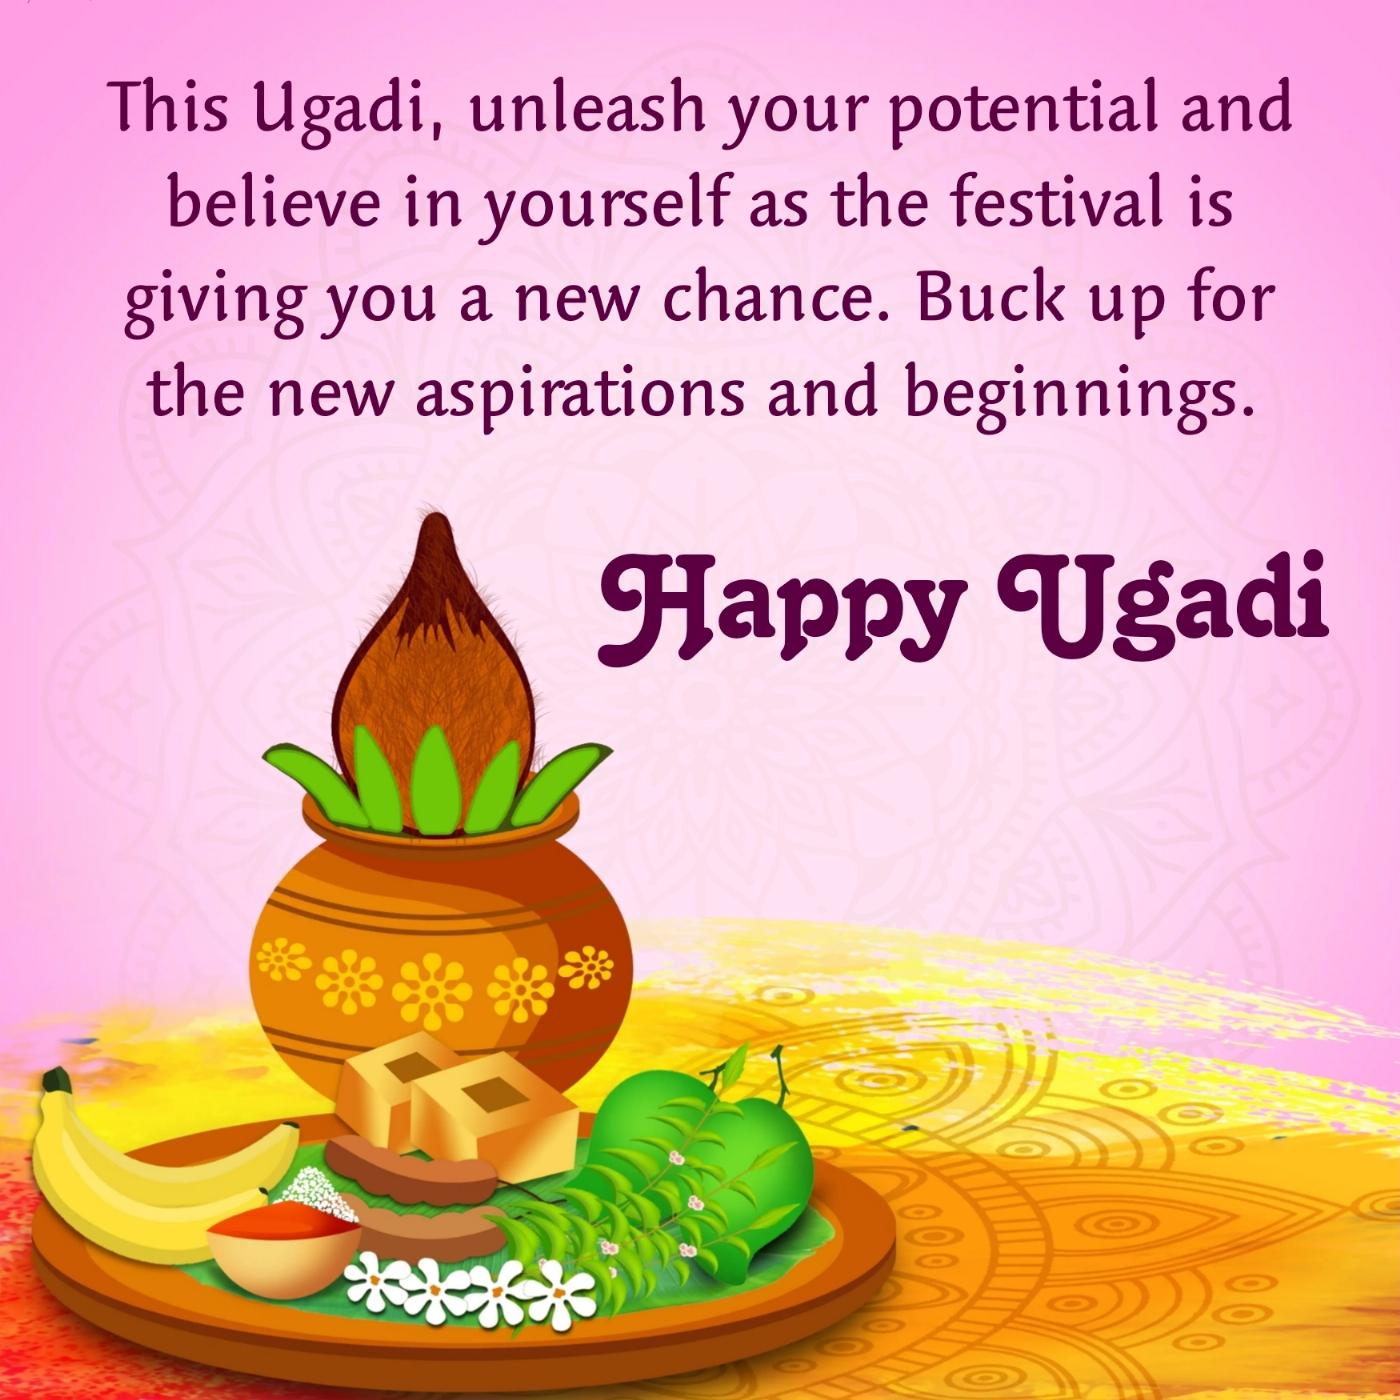 This Ugadi unleash your potential and believe in yourself